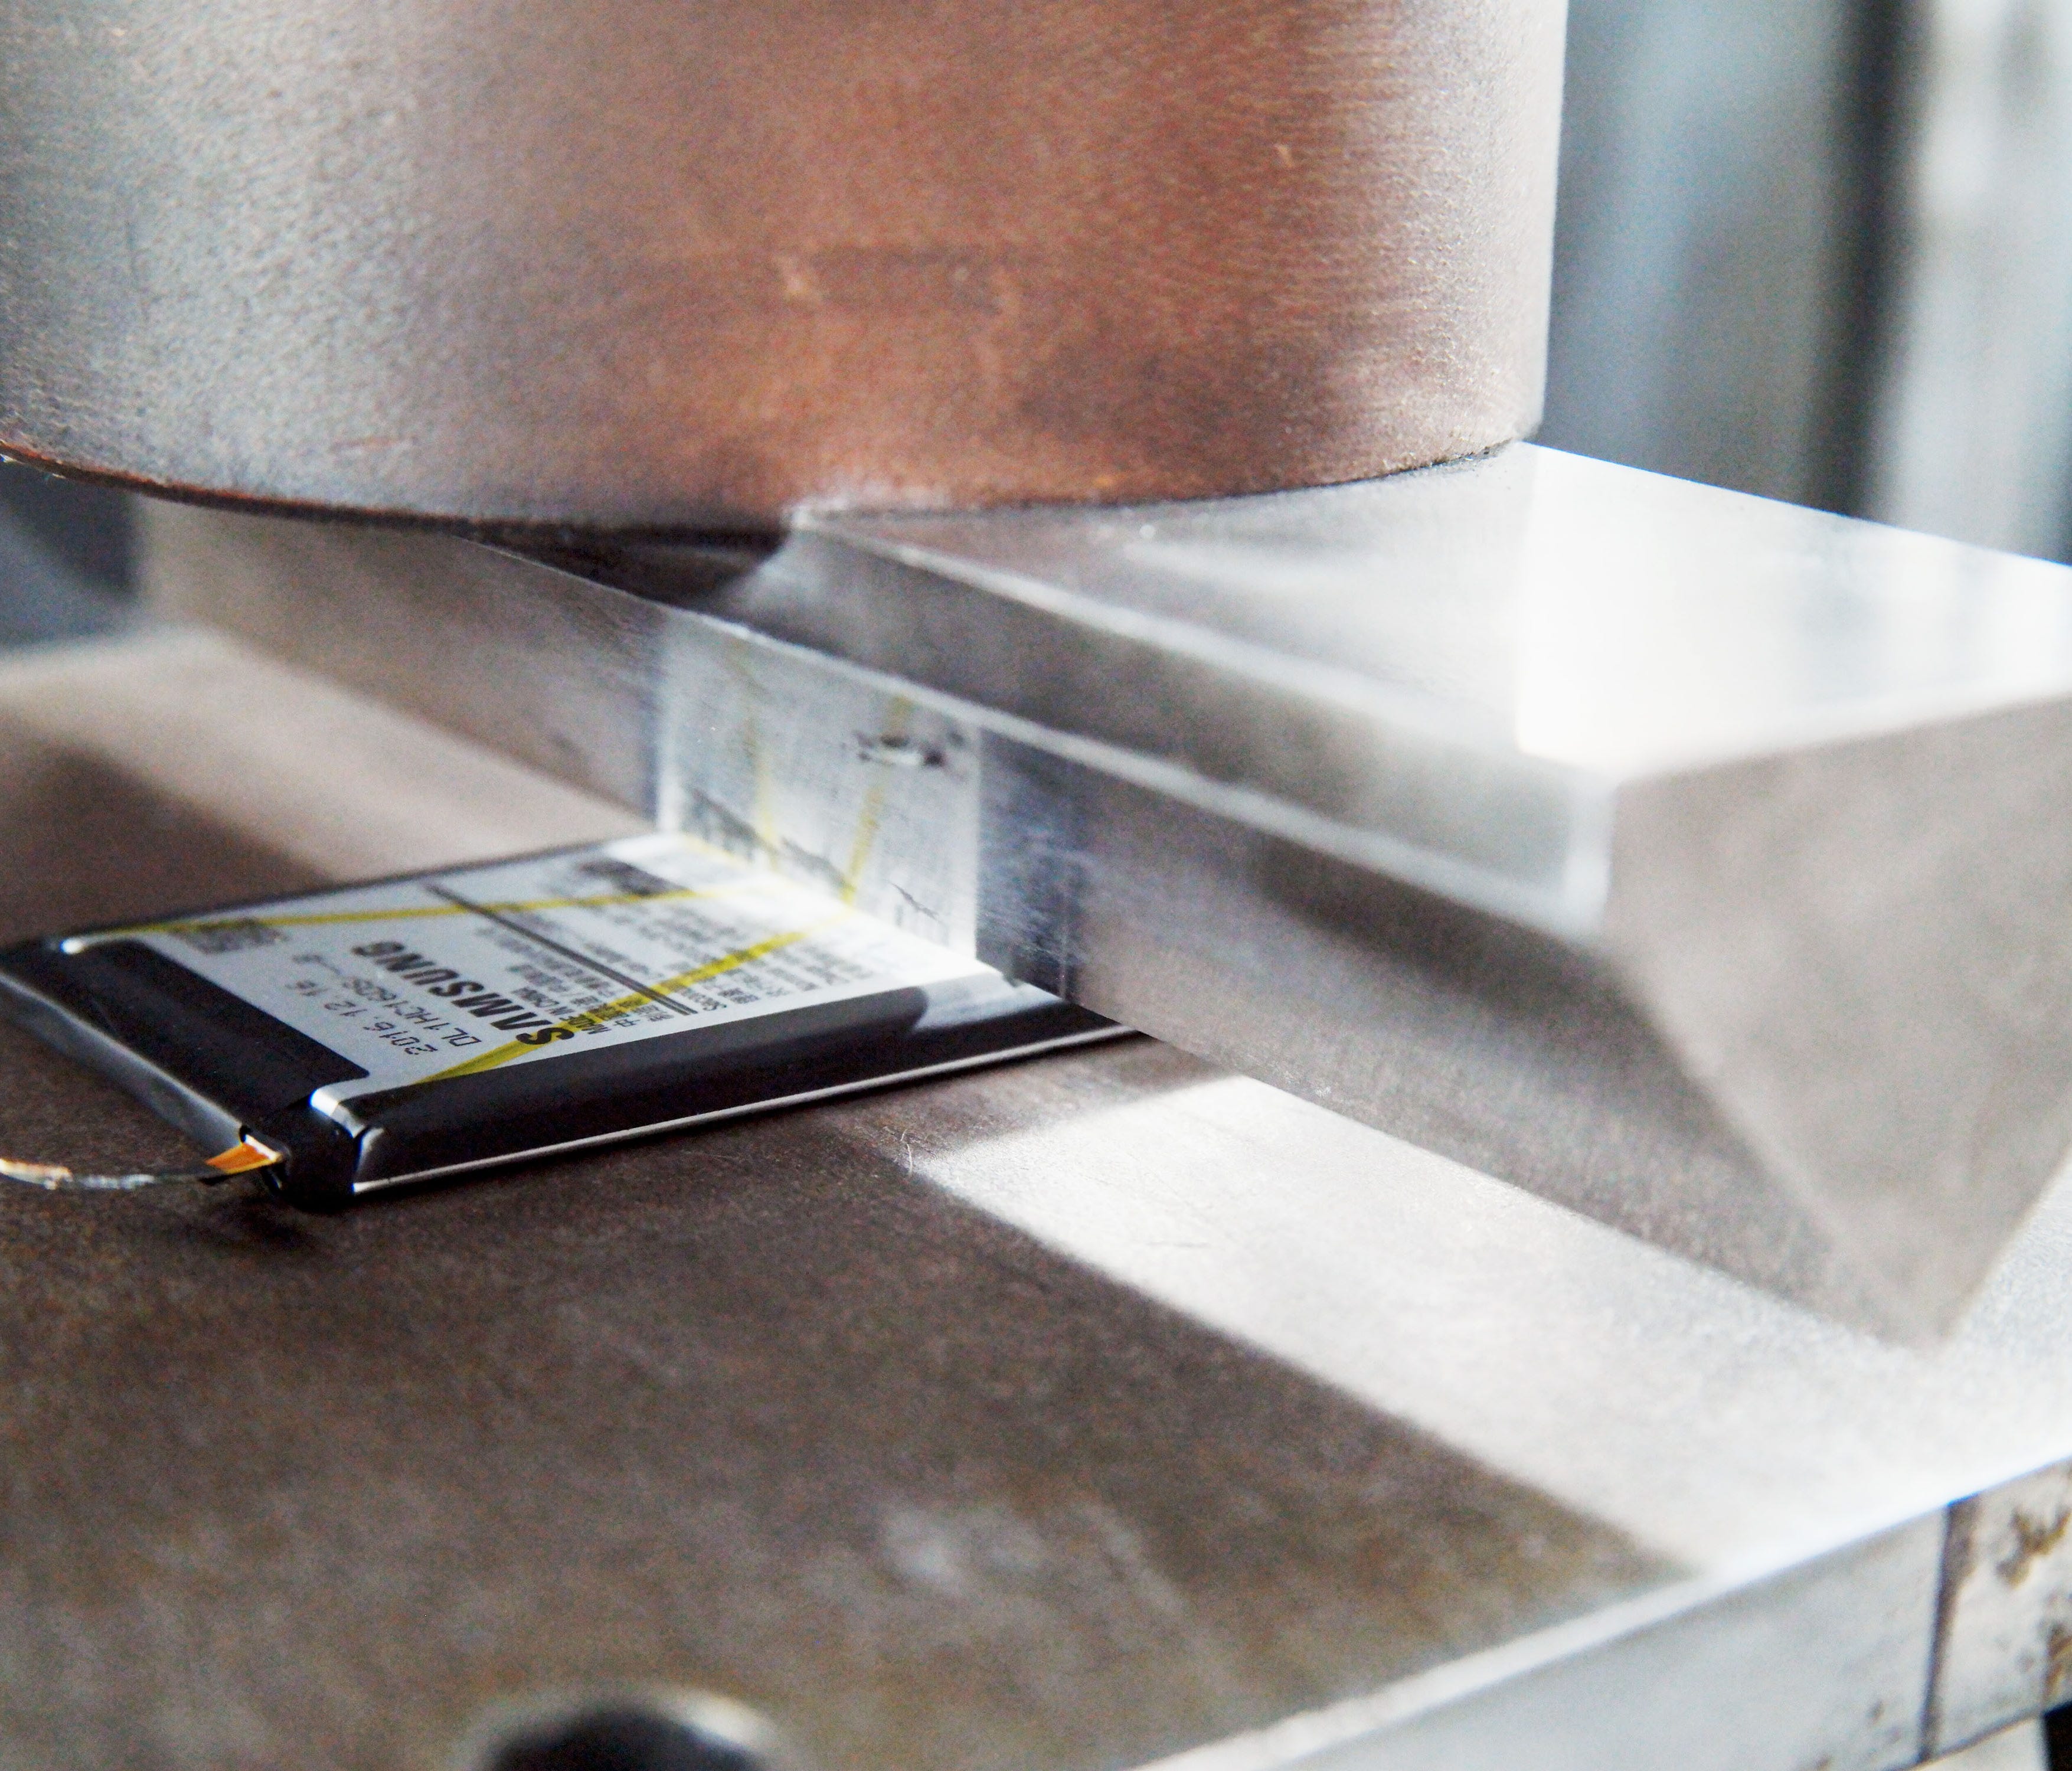 Samsung tests the durability of its batteries at a facility in Gumi, South Korea.